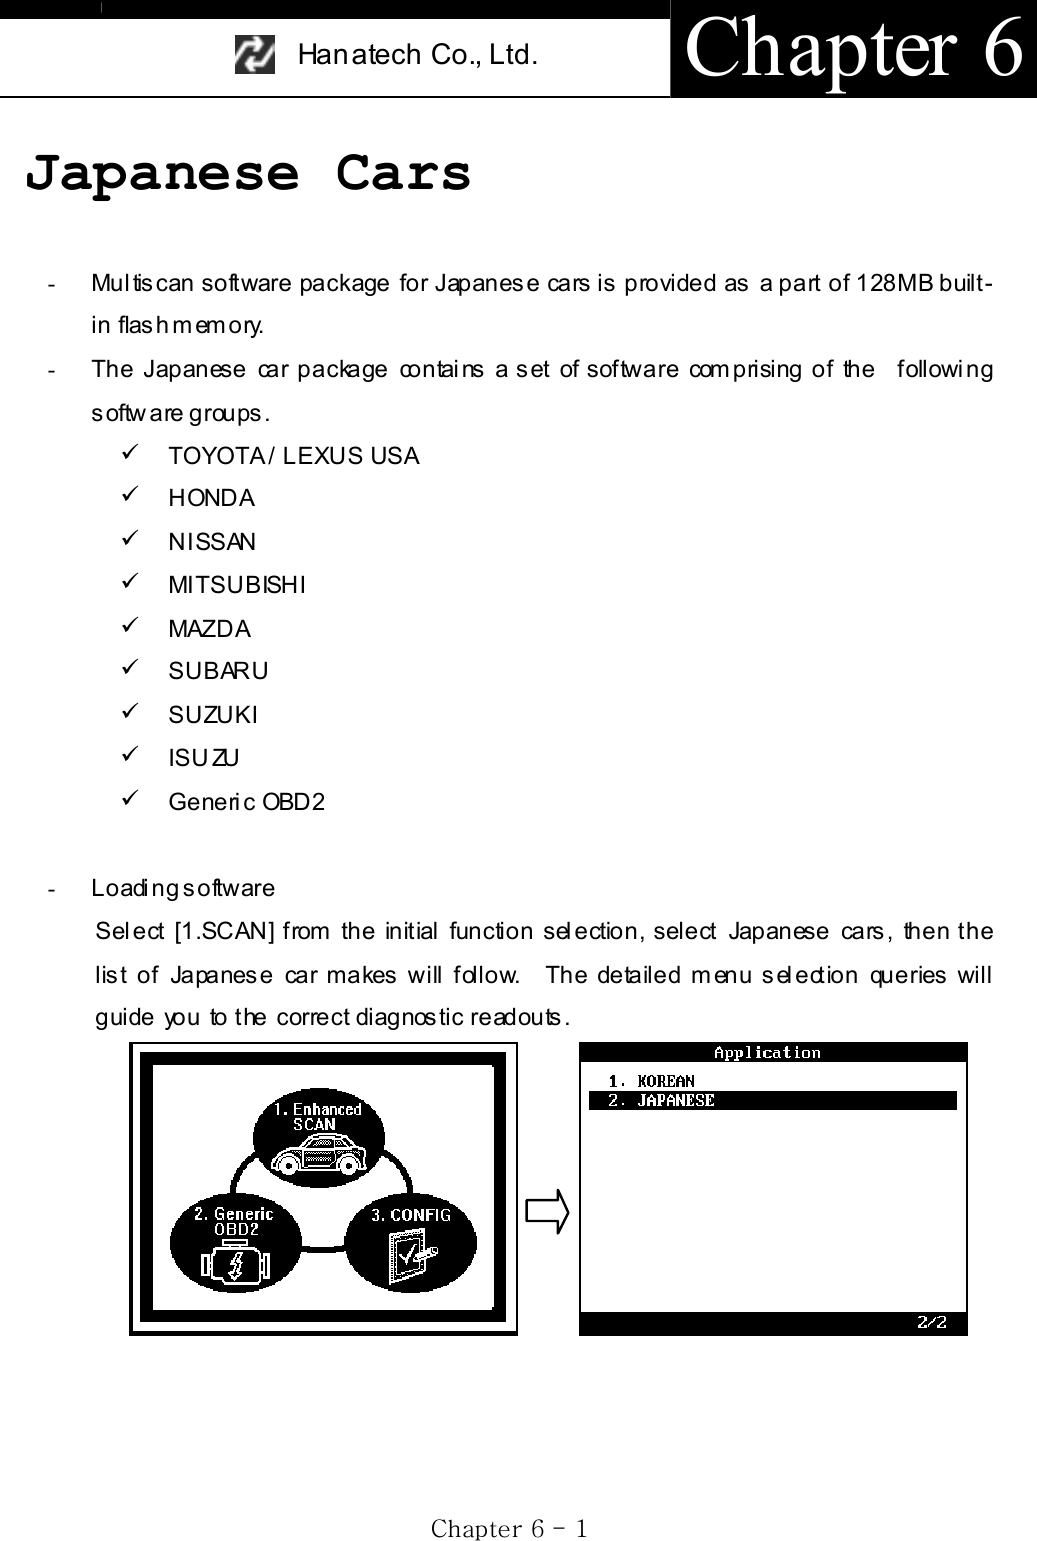 Han atech Co., Ltd.  Chapter 6 GjG]GTG XGJapanese Cars -Multiscan software package for Japanese cars is provided as a part of 128MB built-in flash m em ory.   -The Japanese car package contains a set of software comprising of the   following s oftw are groups.   9 TOYOTA / LEXUS USA   9 HONDA 9 NISSAN 9 MITSUBISHI 9 MAZD A 9 SUBARU 9 SUZUKI 9 ISUZU 9 Generi c OBD2 -Loading software Select [1.SCAN] from the initial function selection, select Japanese cars, then the lis t of Japanes e car makes  will f ollow.  The detailed m enu s el ection queries  will guide you to the correct diagnostic readouts.              